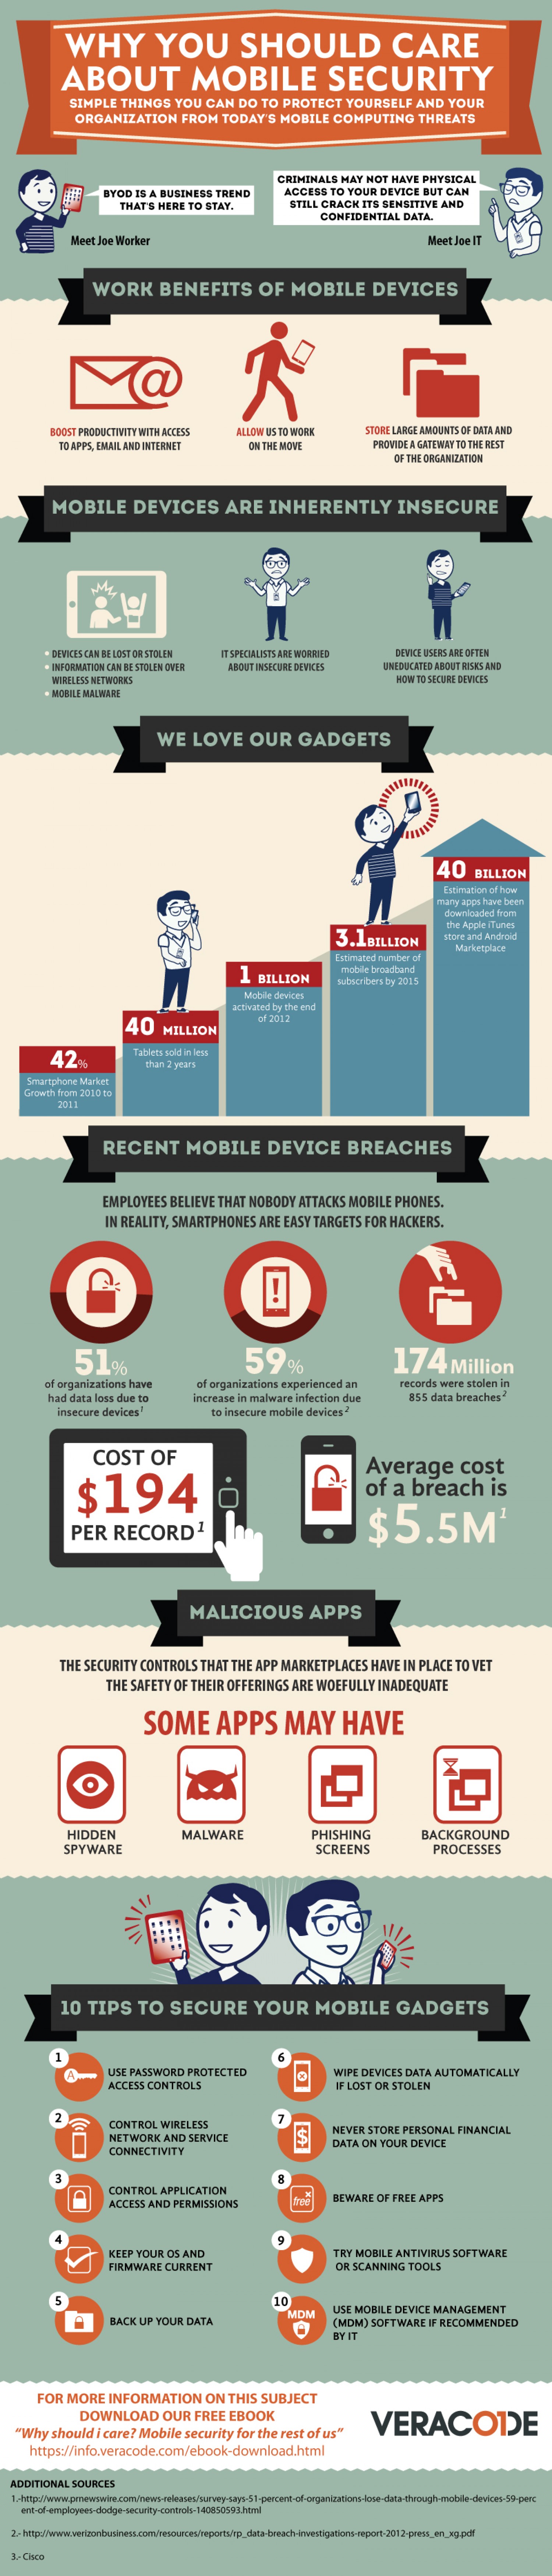 Why you should care about mobile security